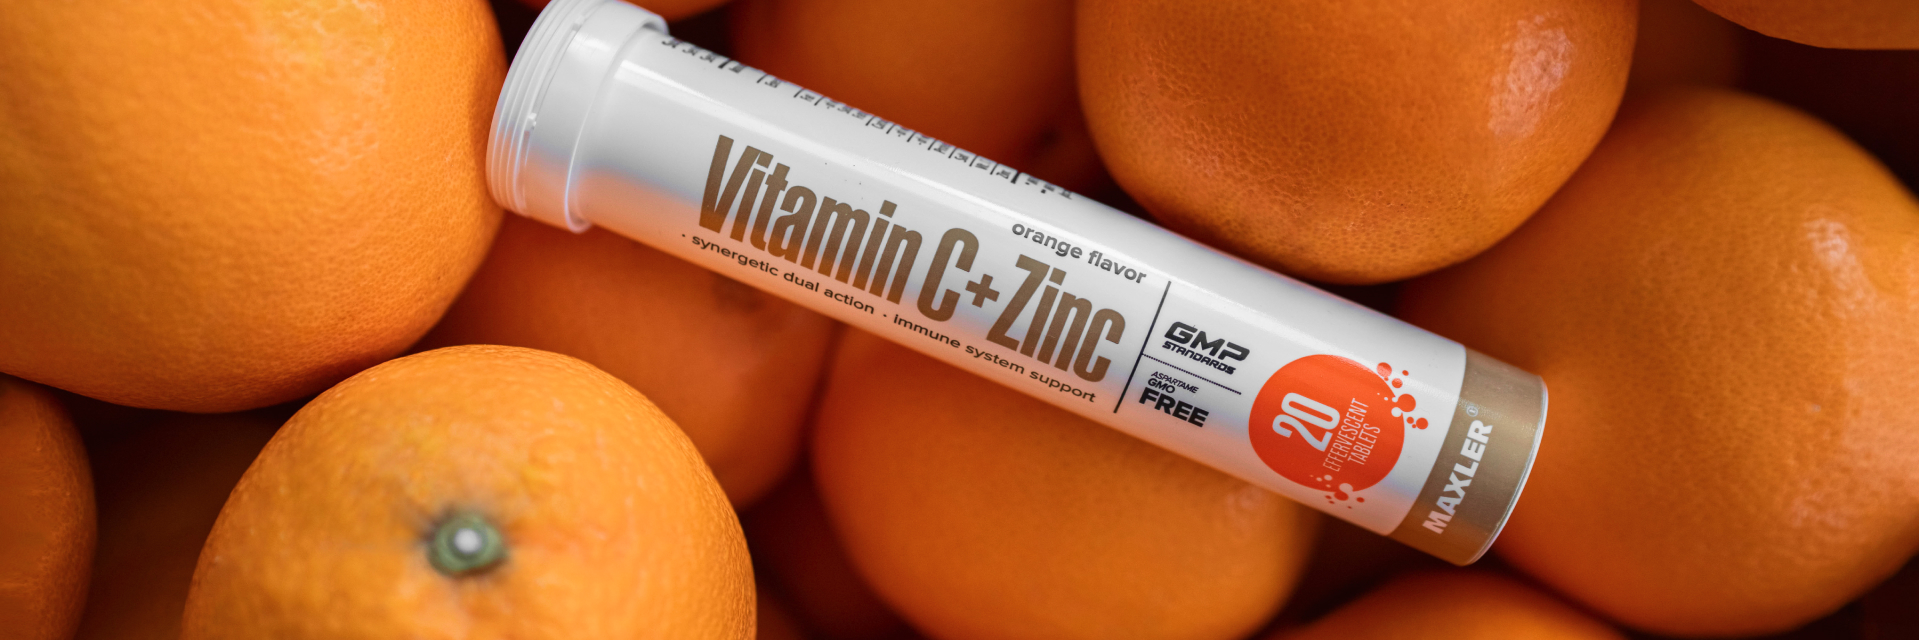 Vitamin C + Zinc Effervescent Tablets tube and some oranges